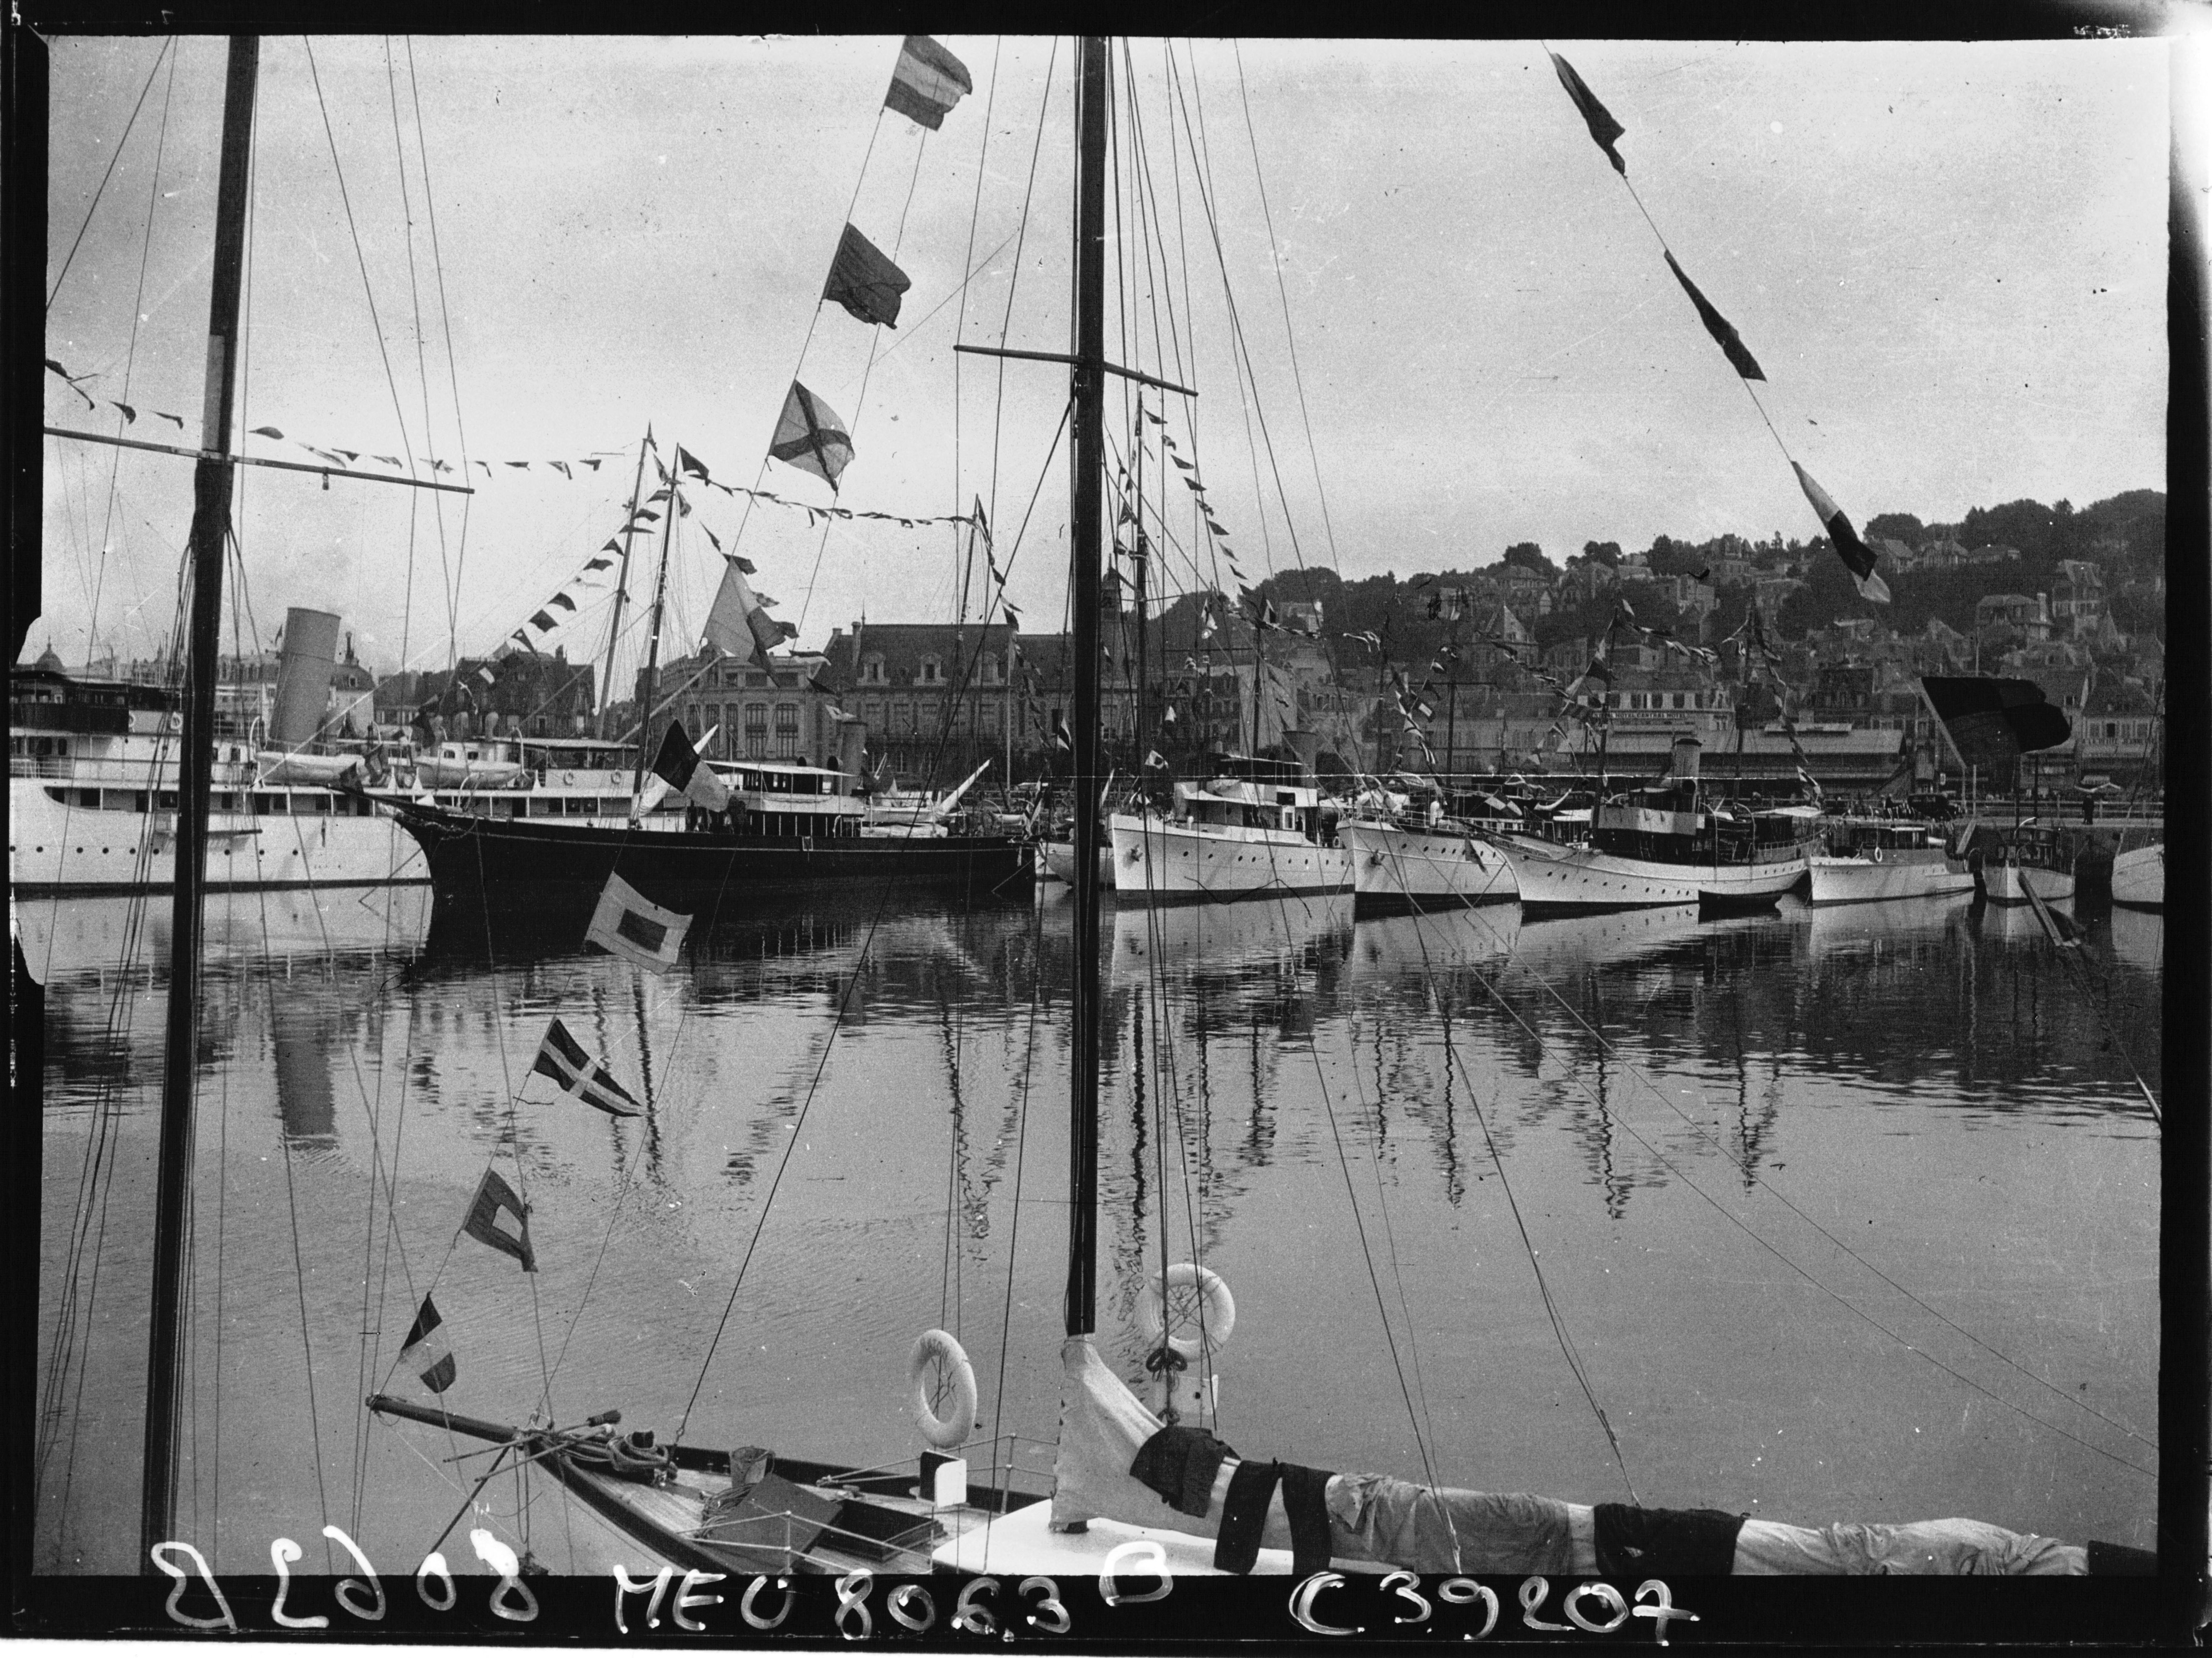 A photograph of a dock line with black and white sailboats. There are also dozens of small flags connected to the sailboat’s mass. The background consists of a large town filled with buildings and hills.